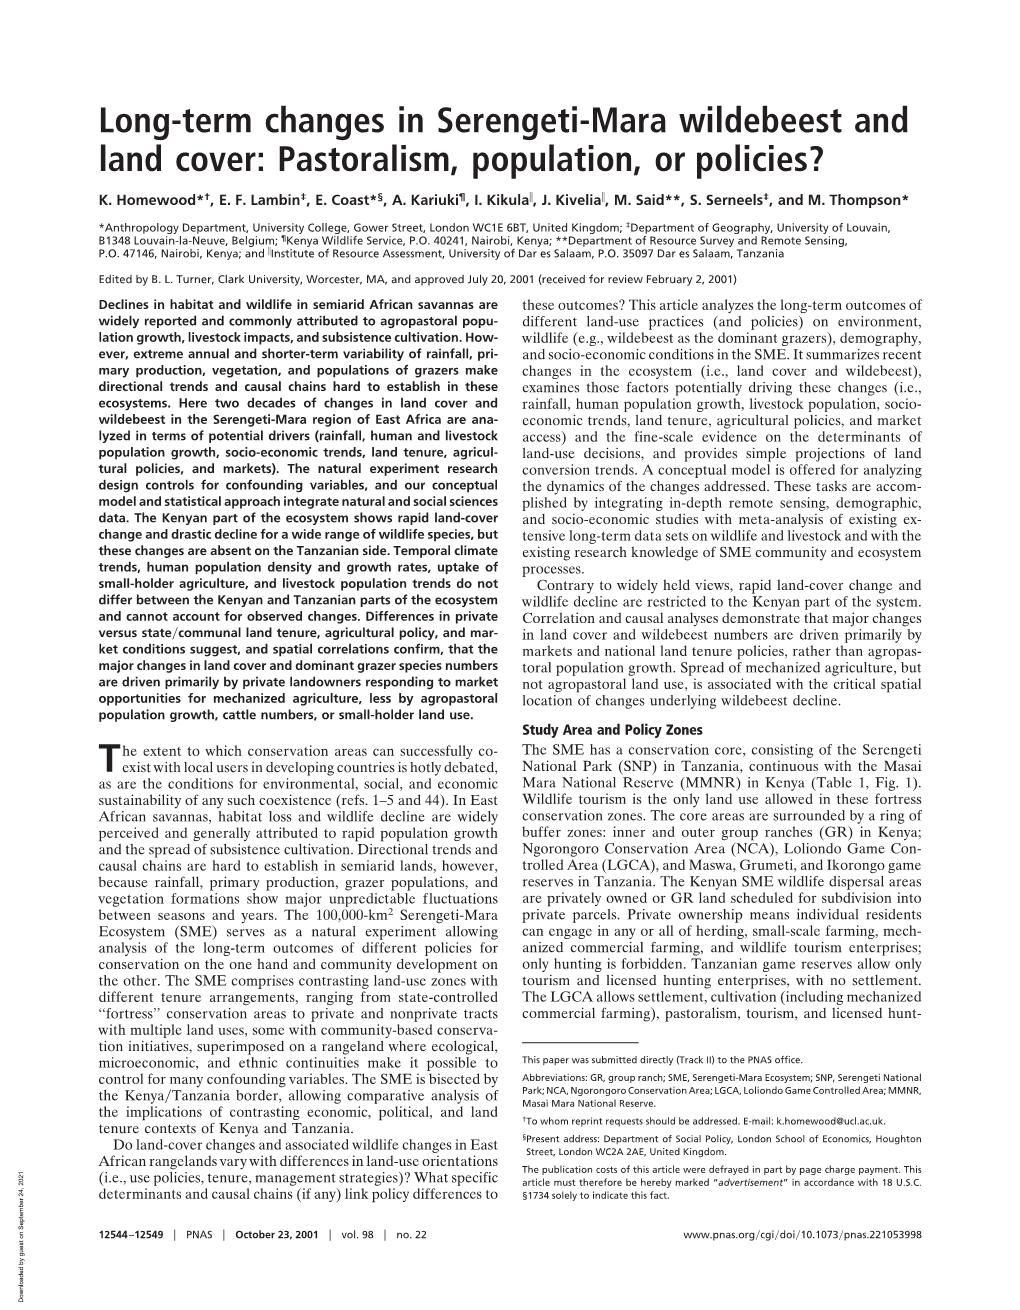 Long-Term Changes in Serengeti-Mara Wildebeest and Land Cover: Pastoralism, Population, Or Policies?